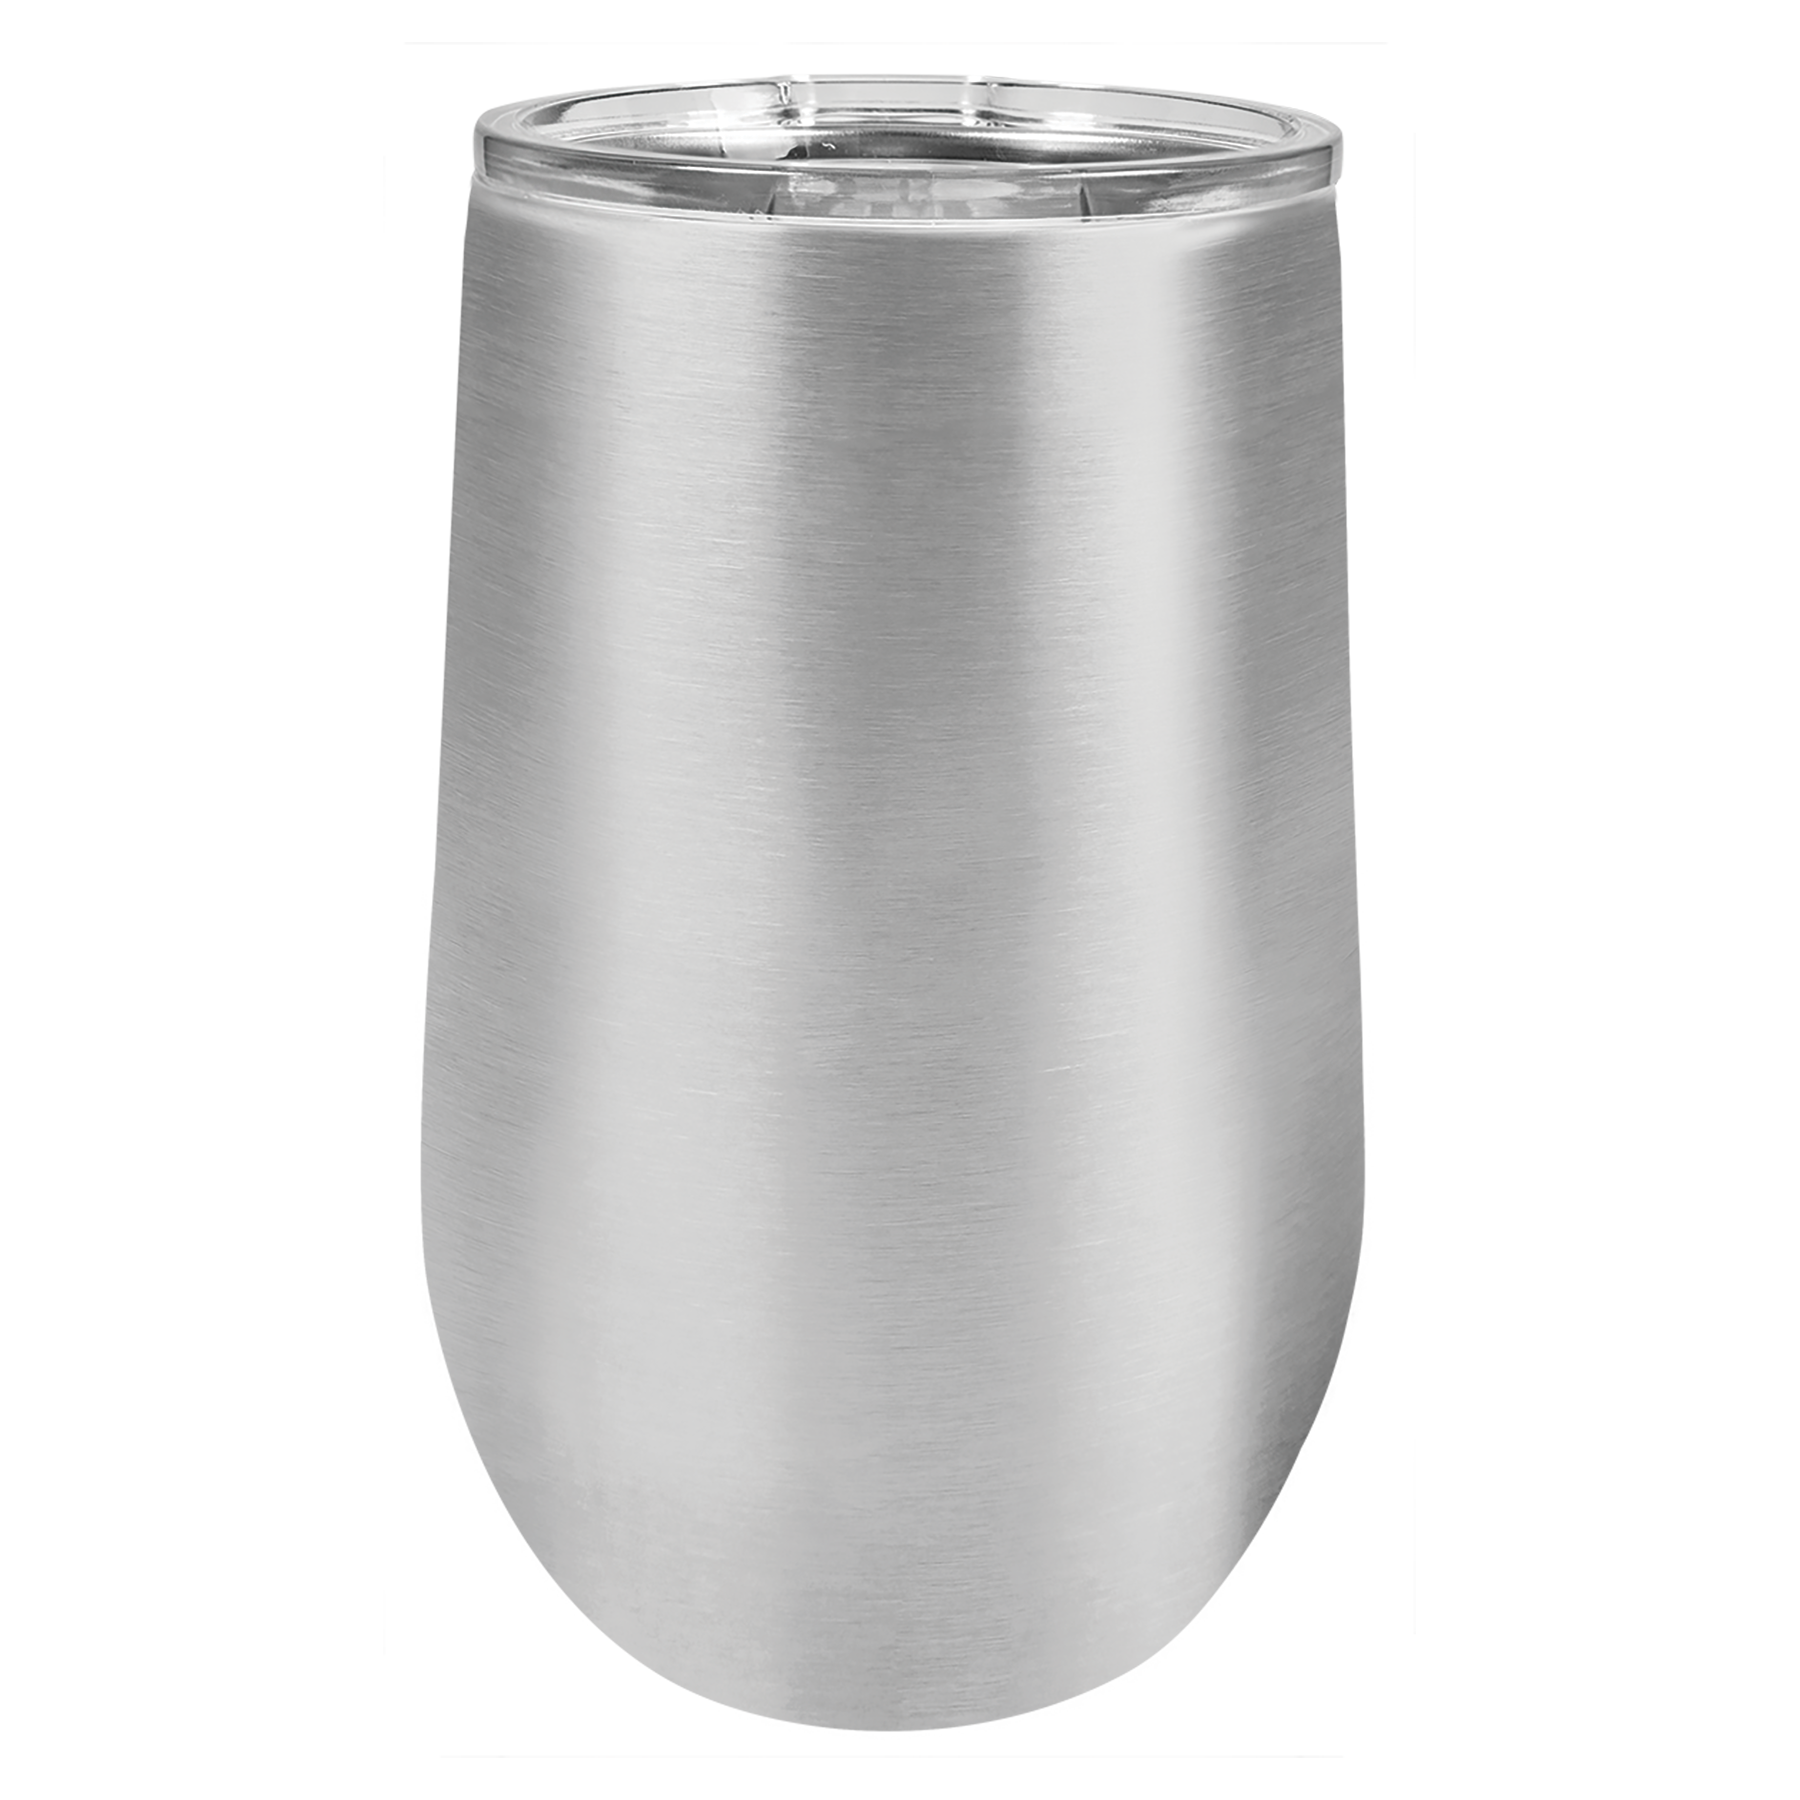 Stainless Steel 16oz Stemless Wine Tumbler -One Free Engraving  -Double-wall Vacuum Insulated  -Made from 18/8 Gauge Stainless Steel (Type 304 Food Grade)  -Lid is BPA Free (Hand Wash Only)  -Not recommended for Dishwasher  -Works with Cold and Hot Drinks  -17 Color Options  -Perfect for Personalized Gifts, Awards, Incentives, Swag & Fundraisers